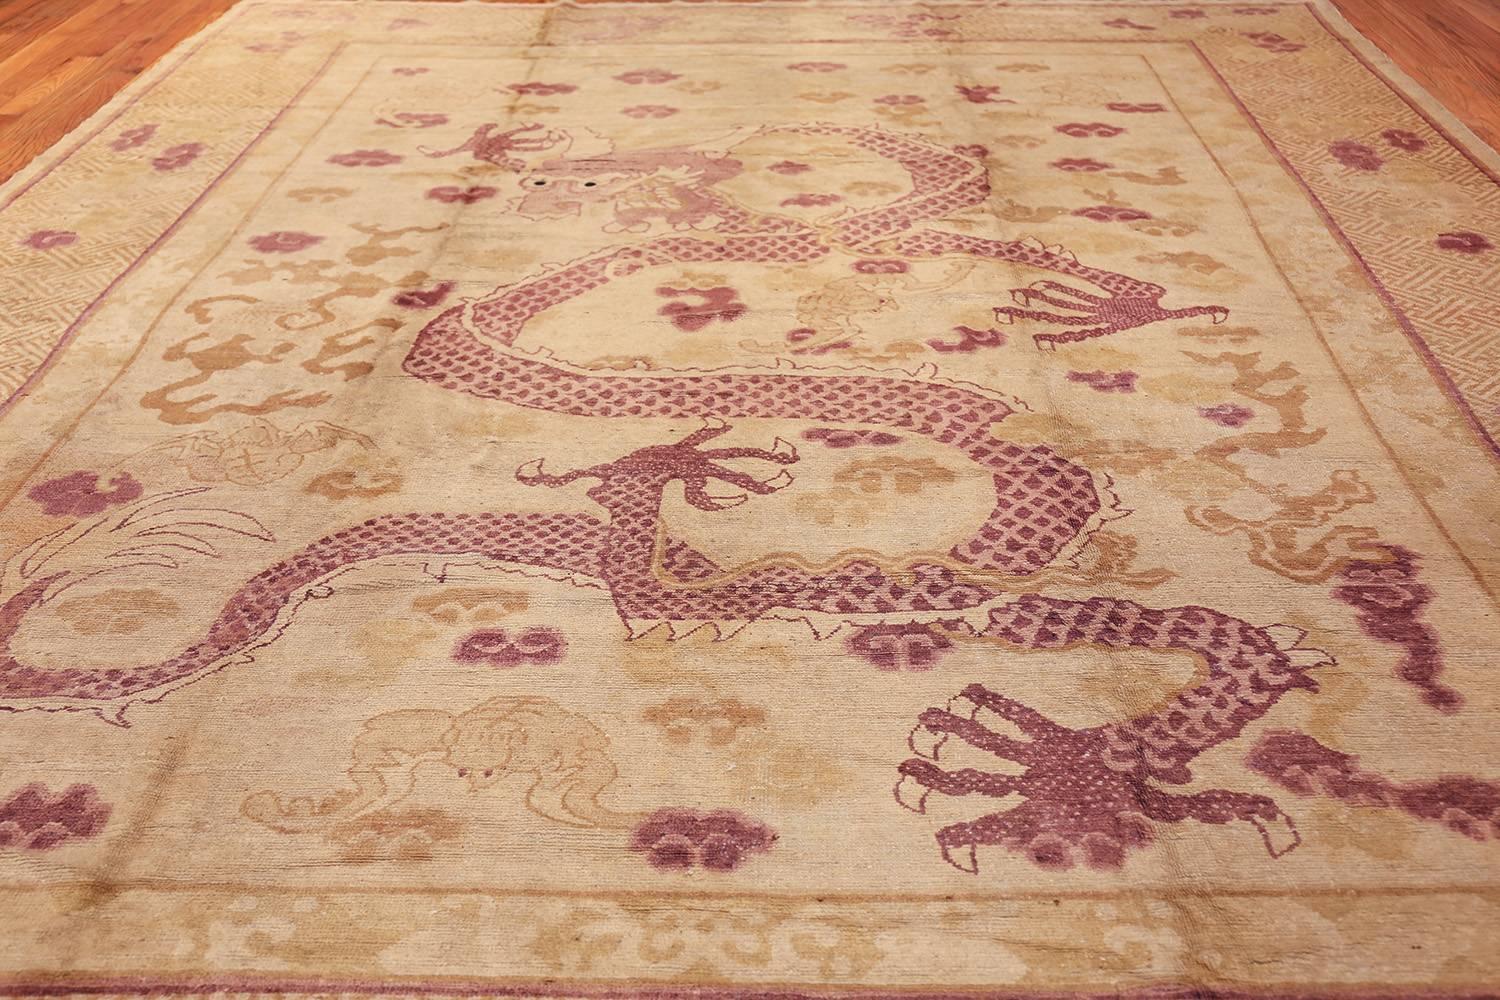 Chinese Export Funky Antique Purple Chinese Dragon Design Rug. Size: 11 ft x 14 ft